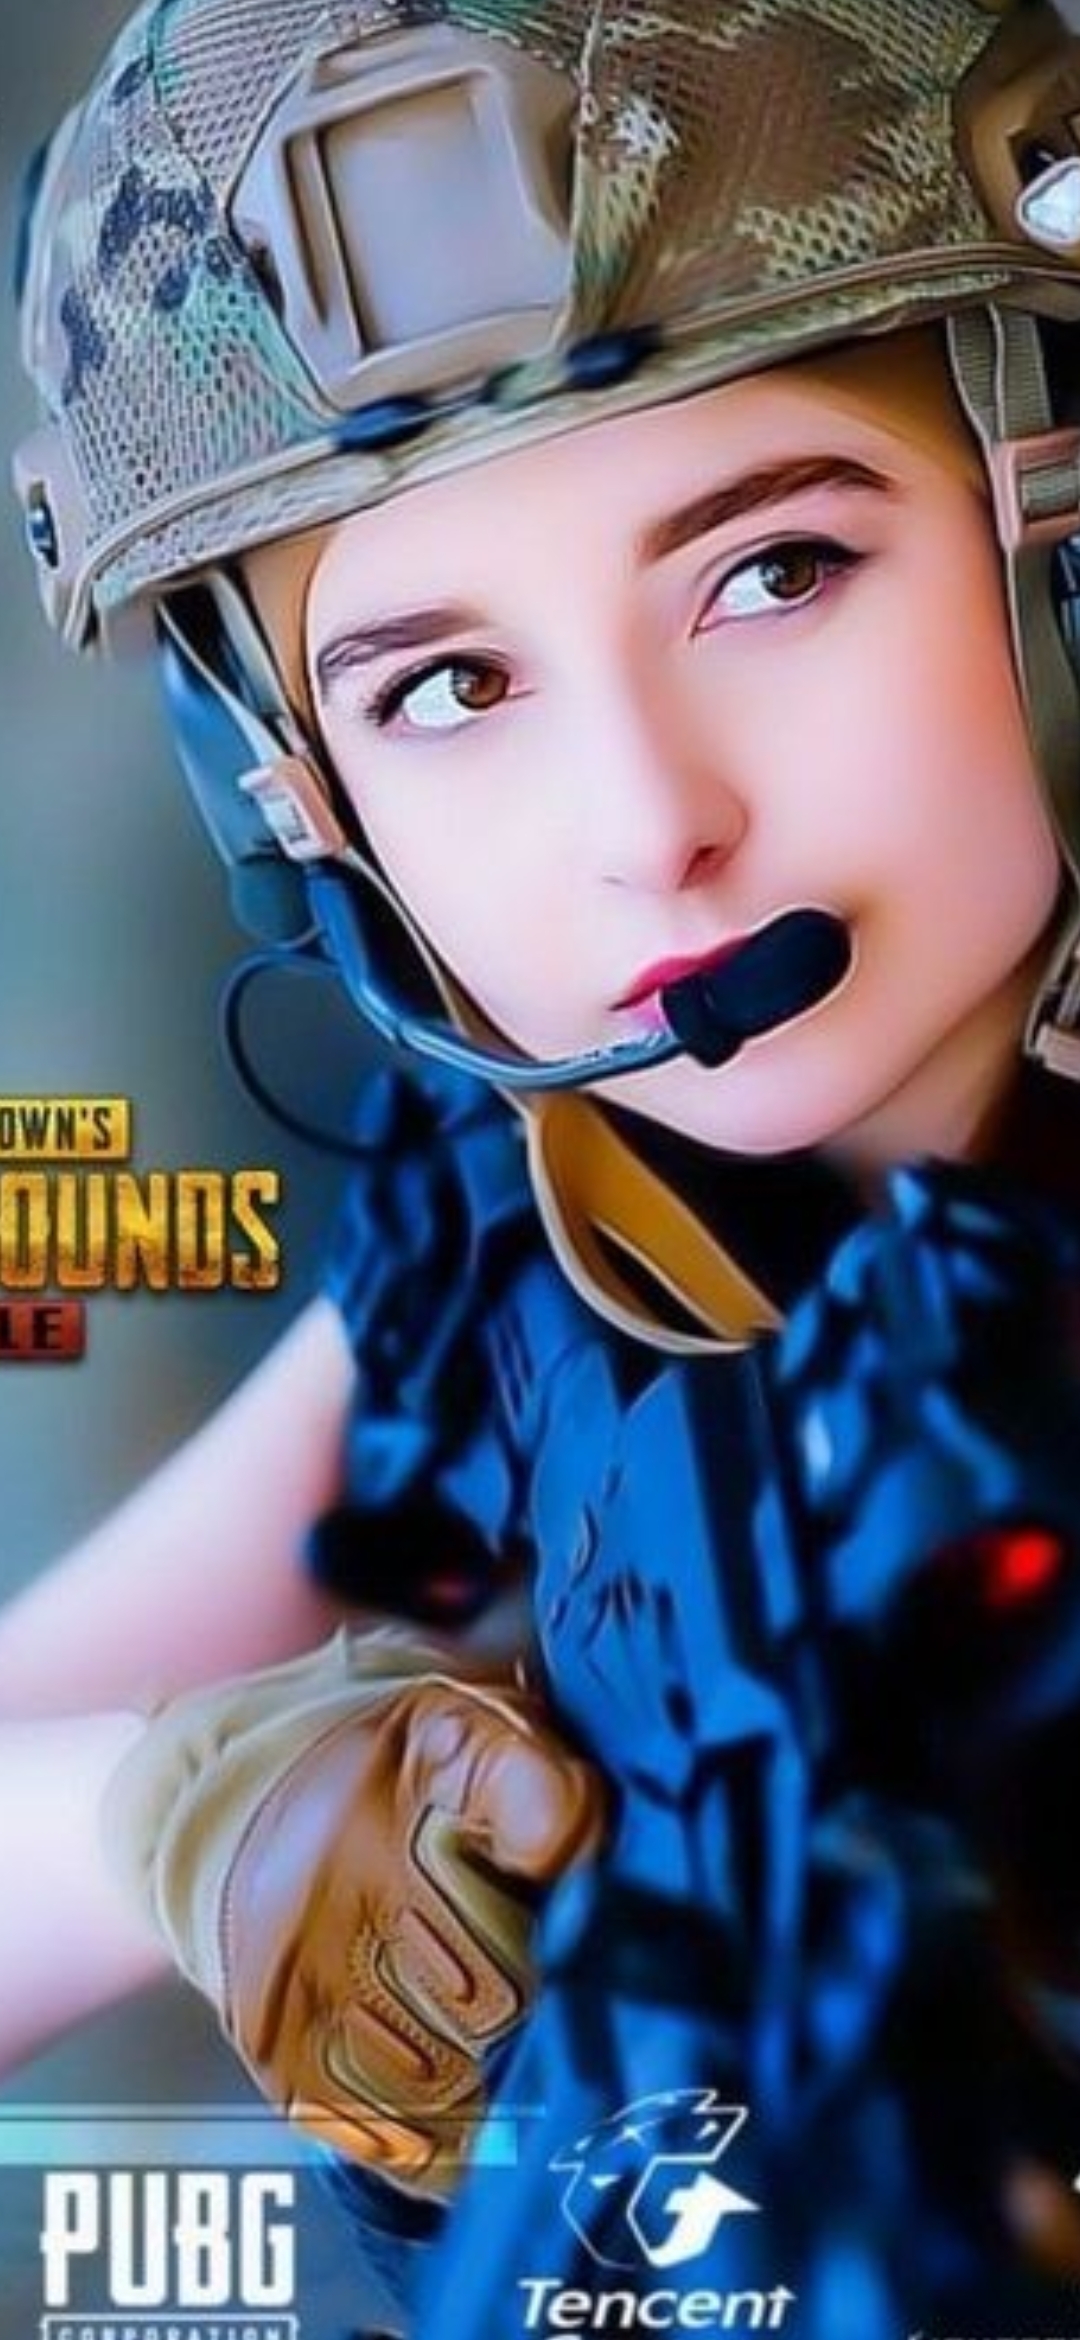 PUBG MOBILE  Victor my dear here I am Sara Sara Where are you  Your new Wheel Woman has arrived Complete missions in our latest event to  earn vouchers for the new